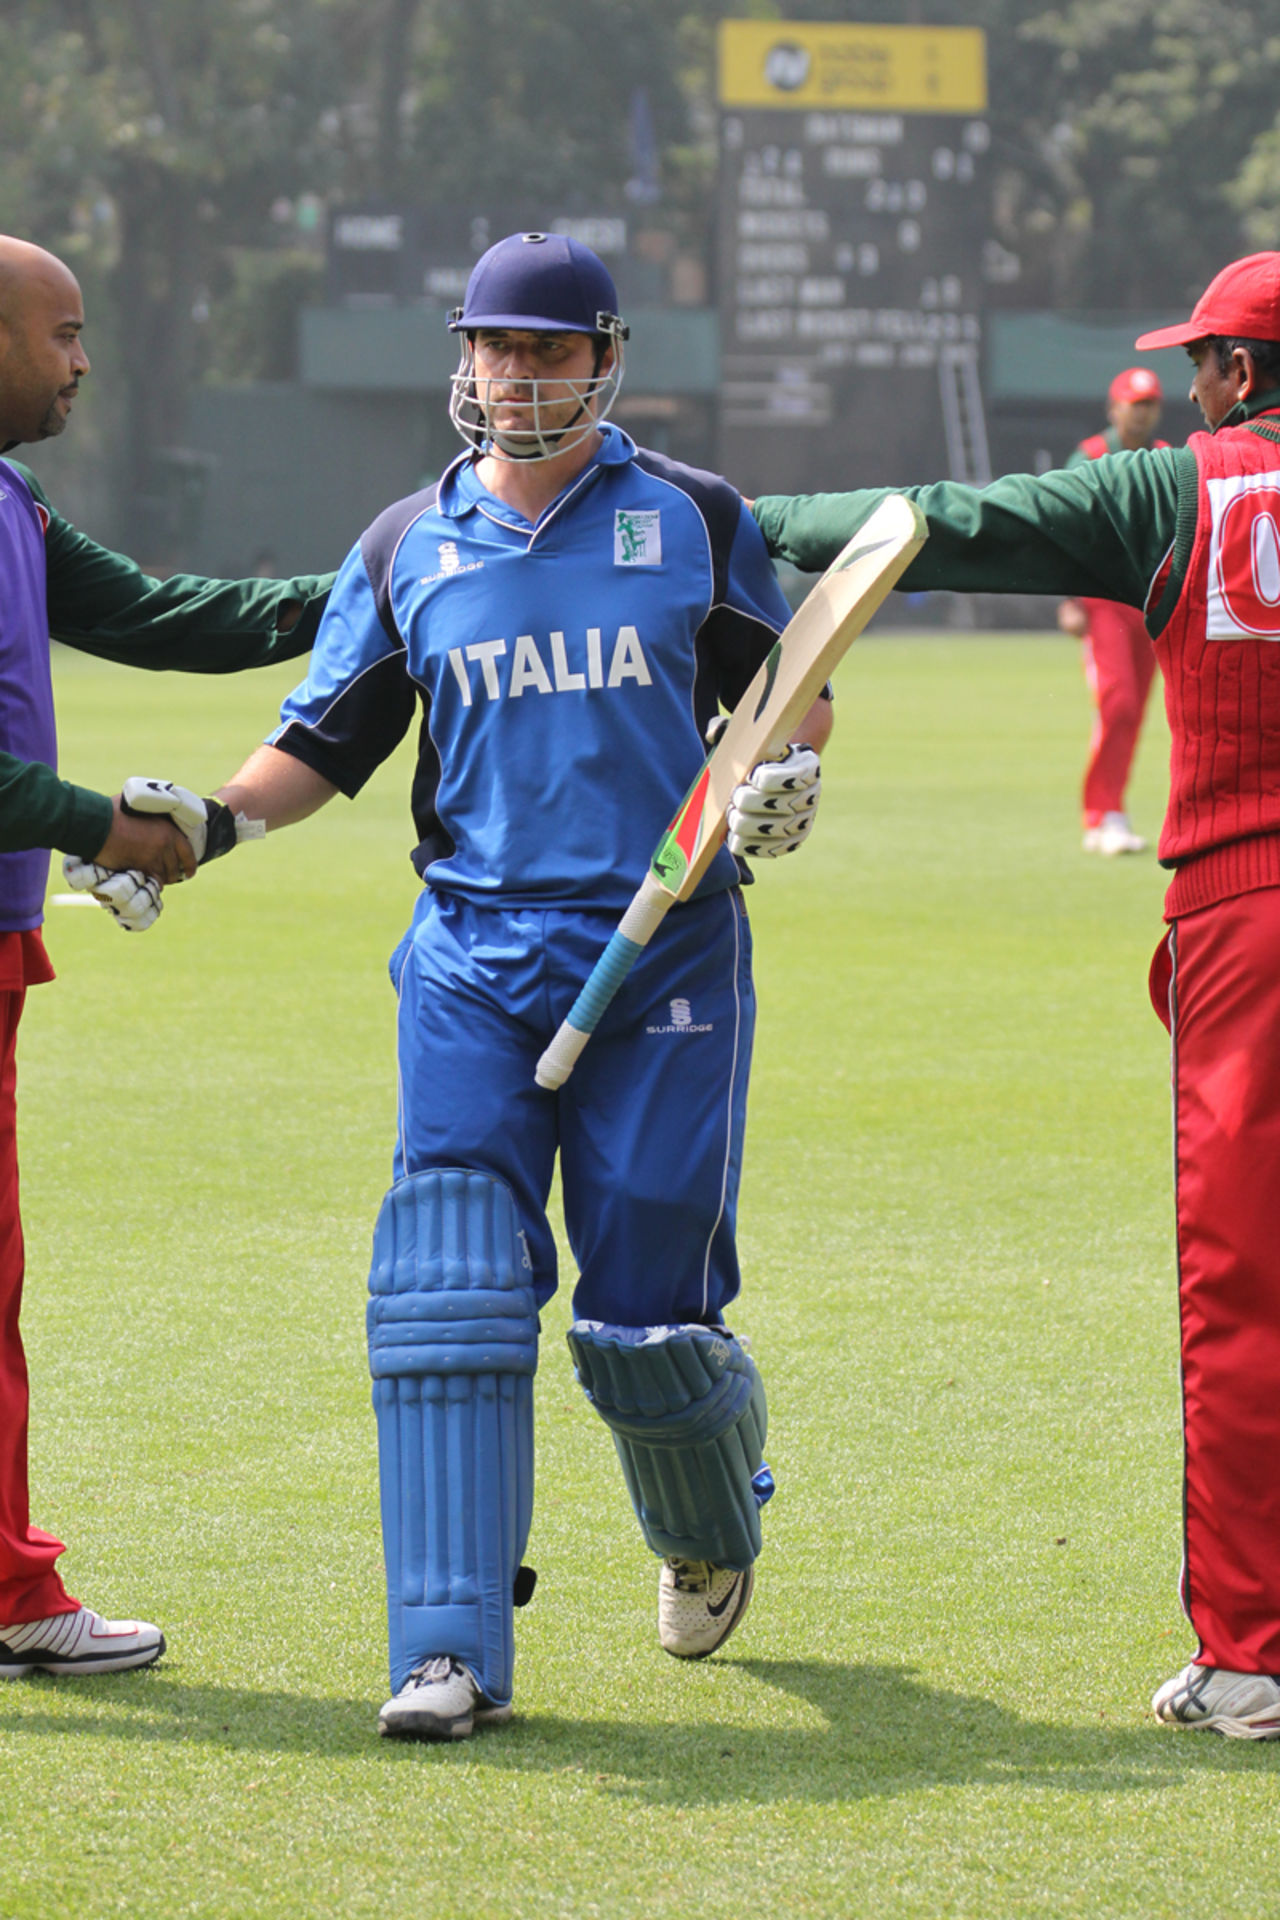 Italy captain Alessandro Bonora is congratulated by the Oman players as he leaves the field after scoring 124 not out in the Pepsi ICC WCL Division 3 match played at Kowloon Cricket Club, Hong Kong, on 25th January 2011